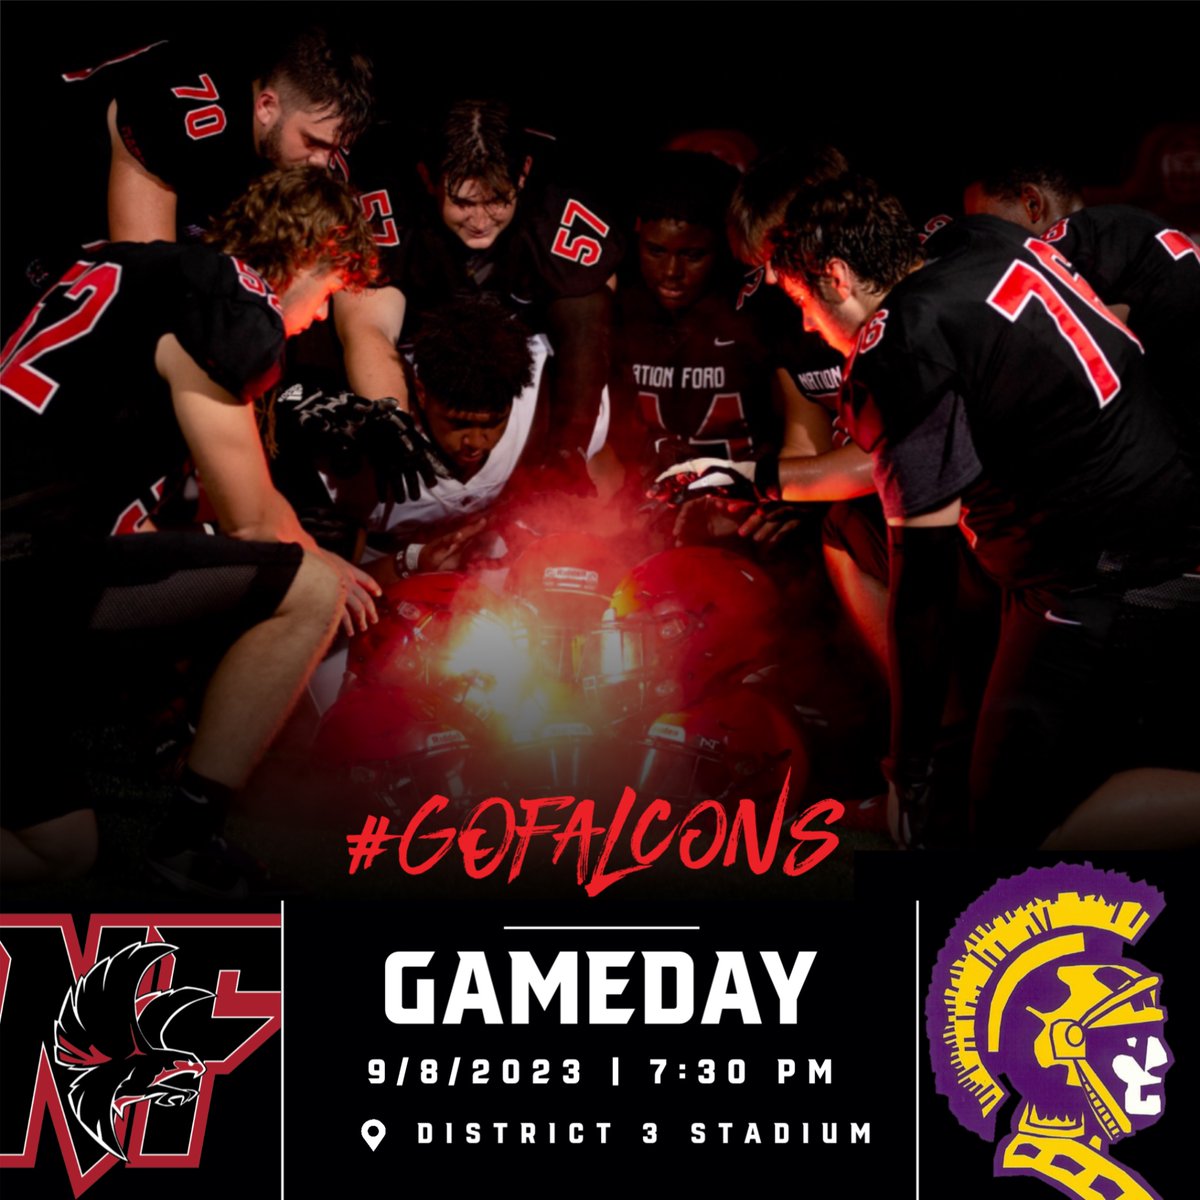 It’s game day y’all for the Nation Ford Falcons Football Team… Let’s get out there and beat Northwestern! Game starts at 7:30. See you there. #BeattheTrojans #onenation #US #ALLIN